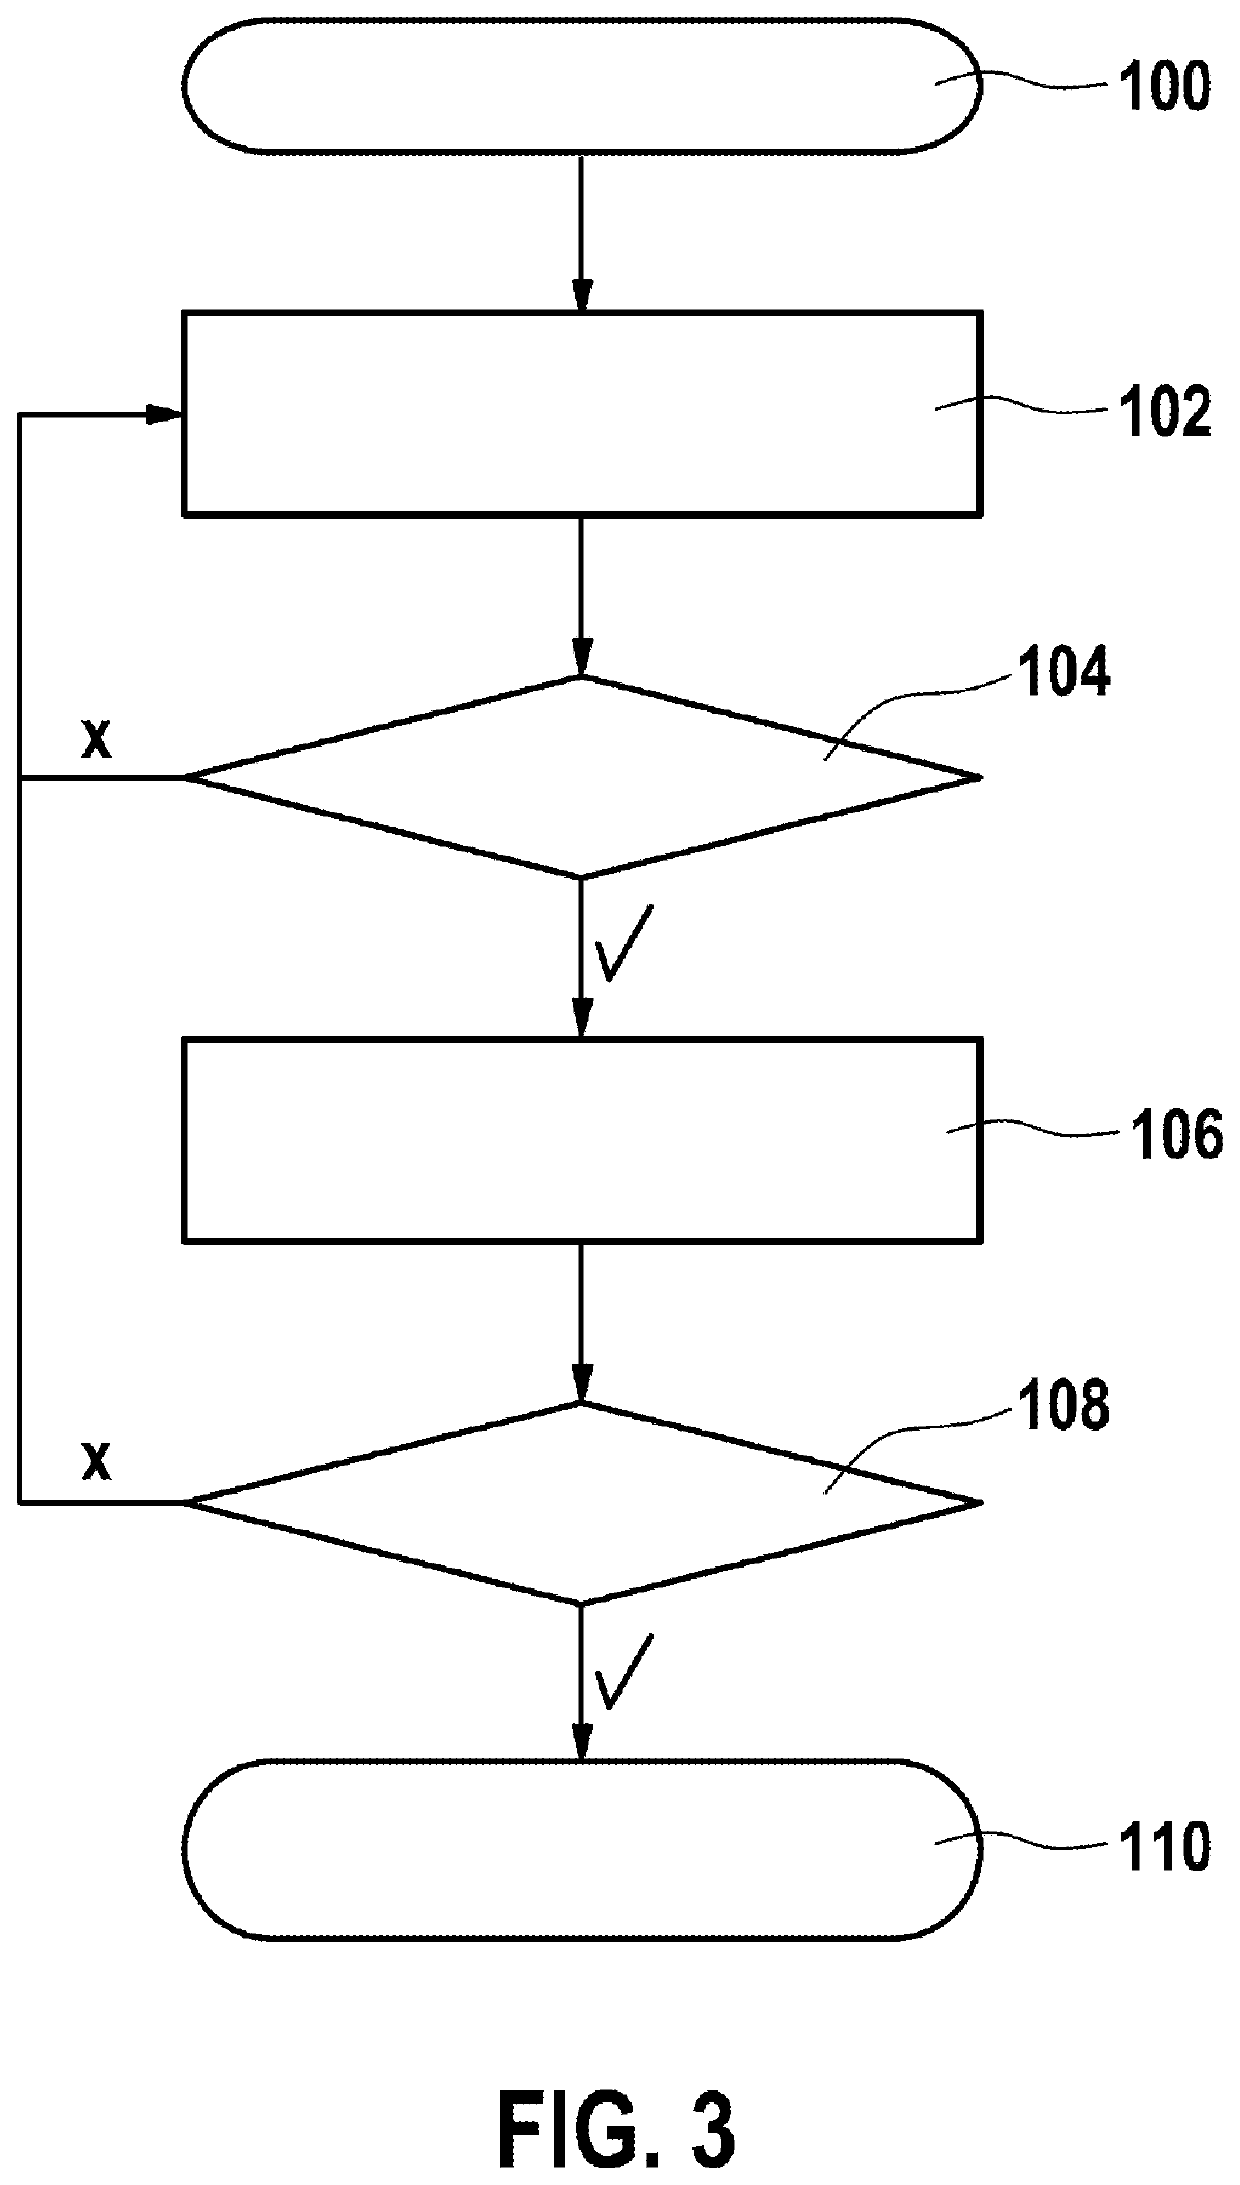 Method of determining the evaluation time for a diagnosis